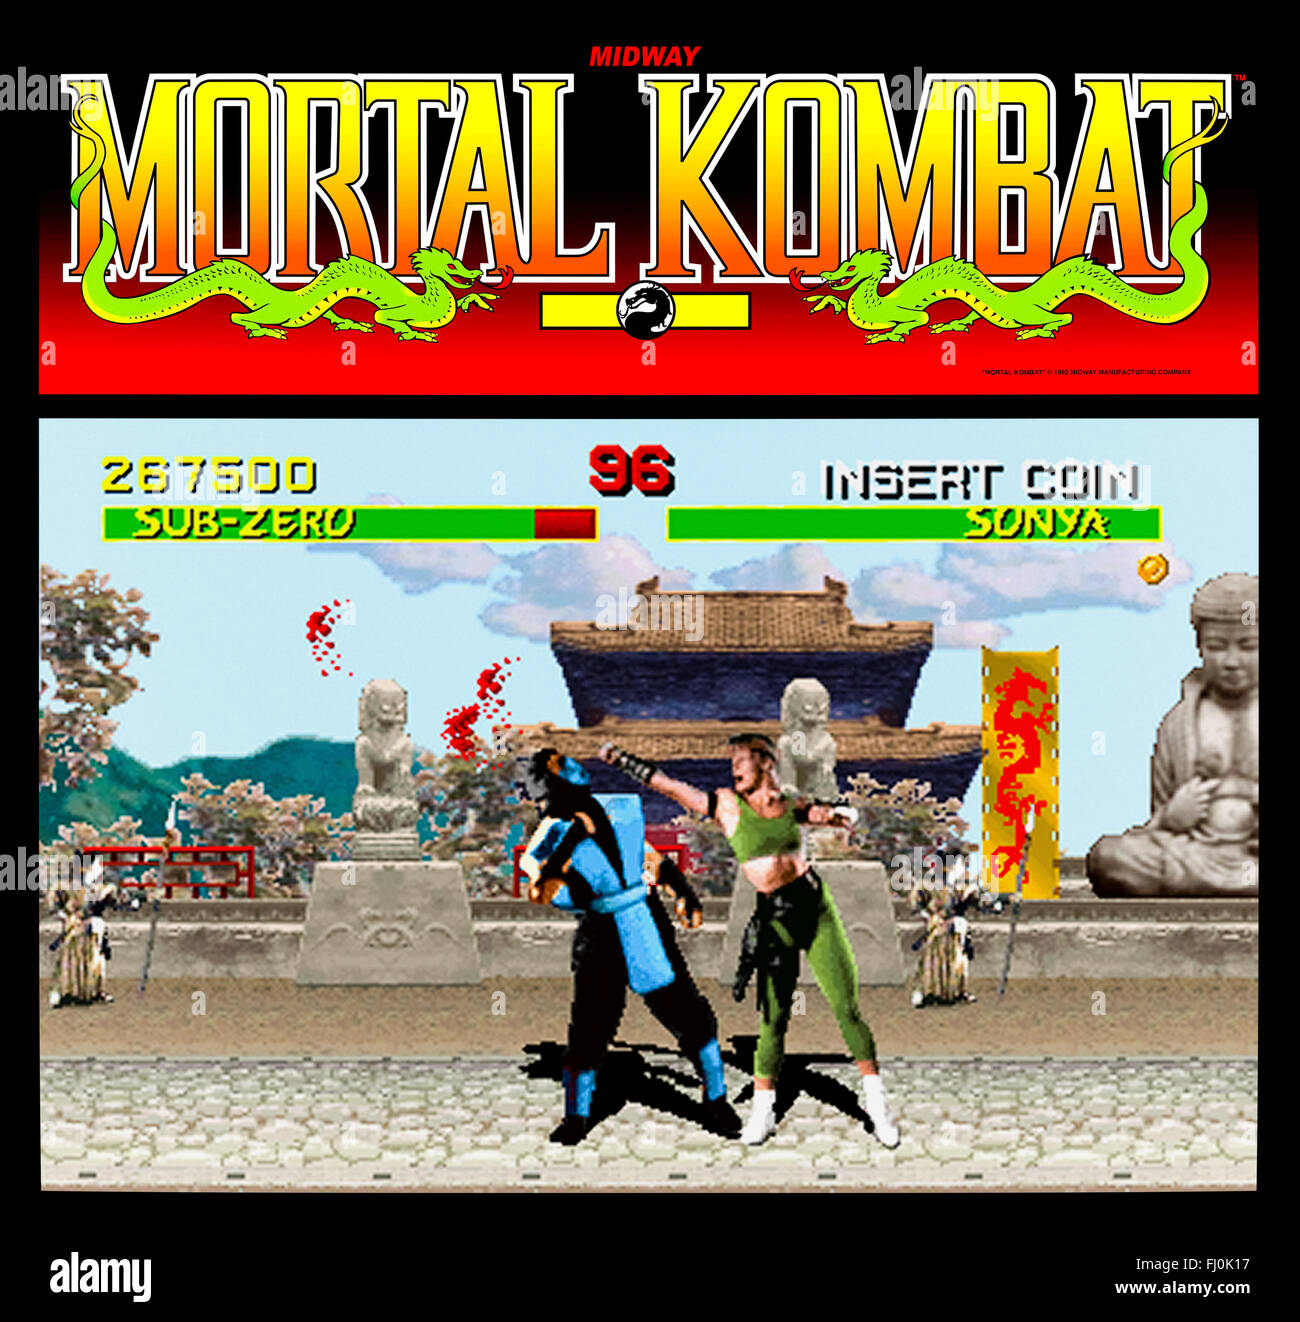 'Mortal Kombat' the original arcade game that started the wildly successful franchise first released in 1992 by Midway Games to much controversy due to over the top violence and gore. See description for more information. Stock Photo